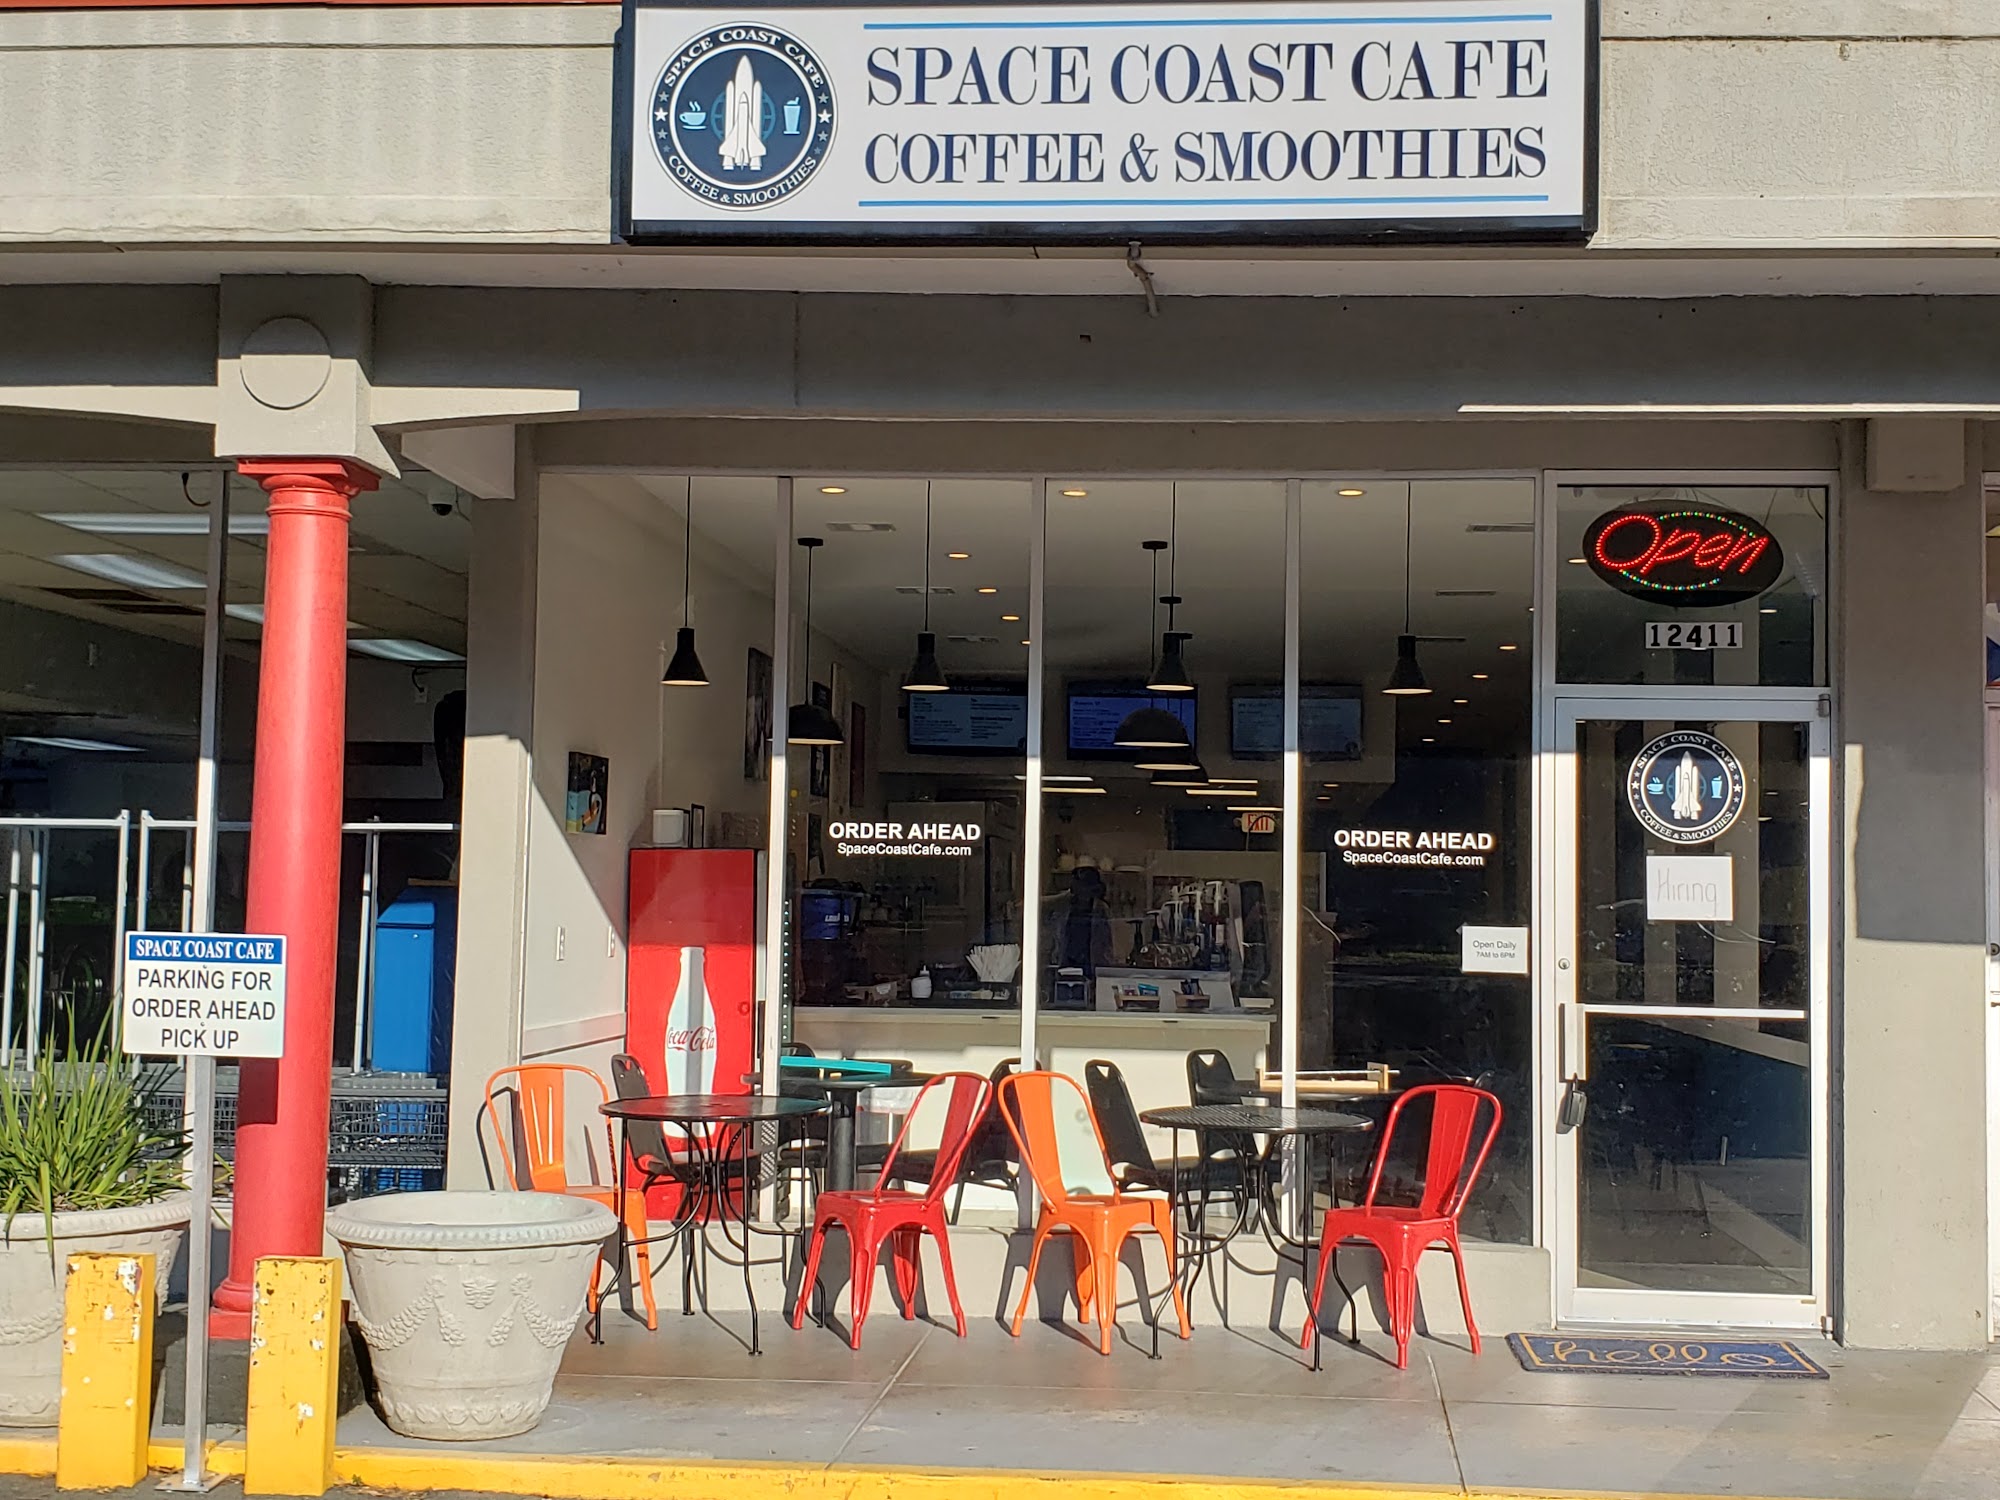 Space Coast Cafe Coffee & Smoothies